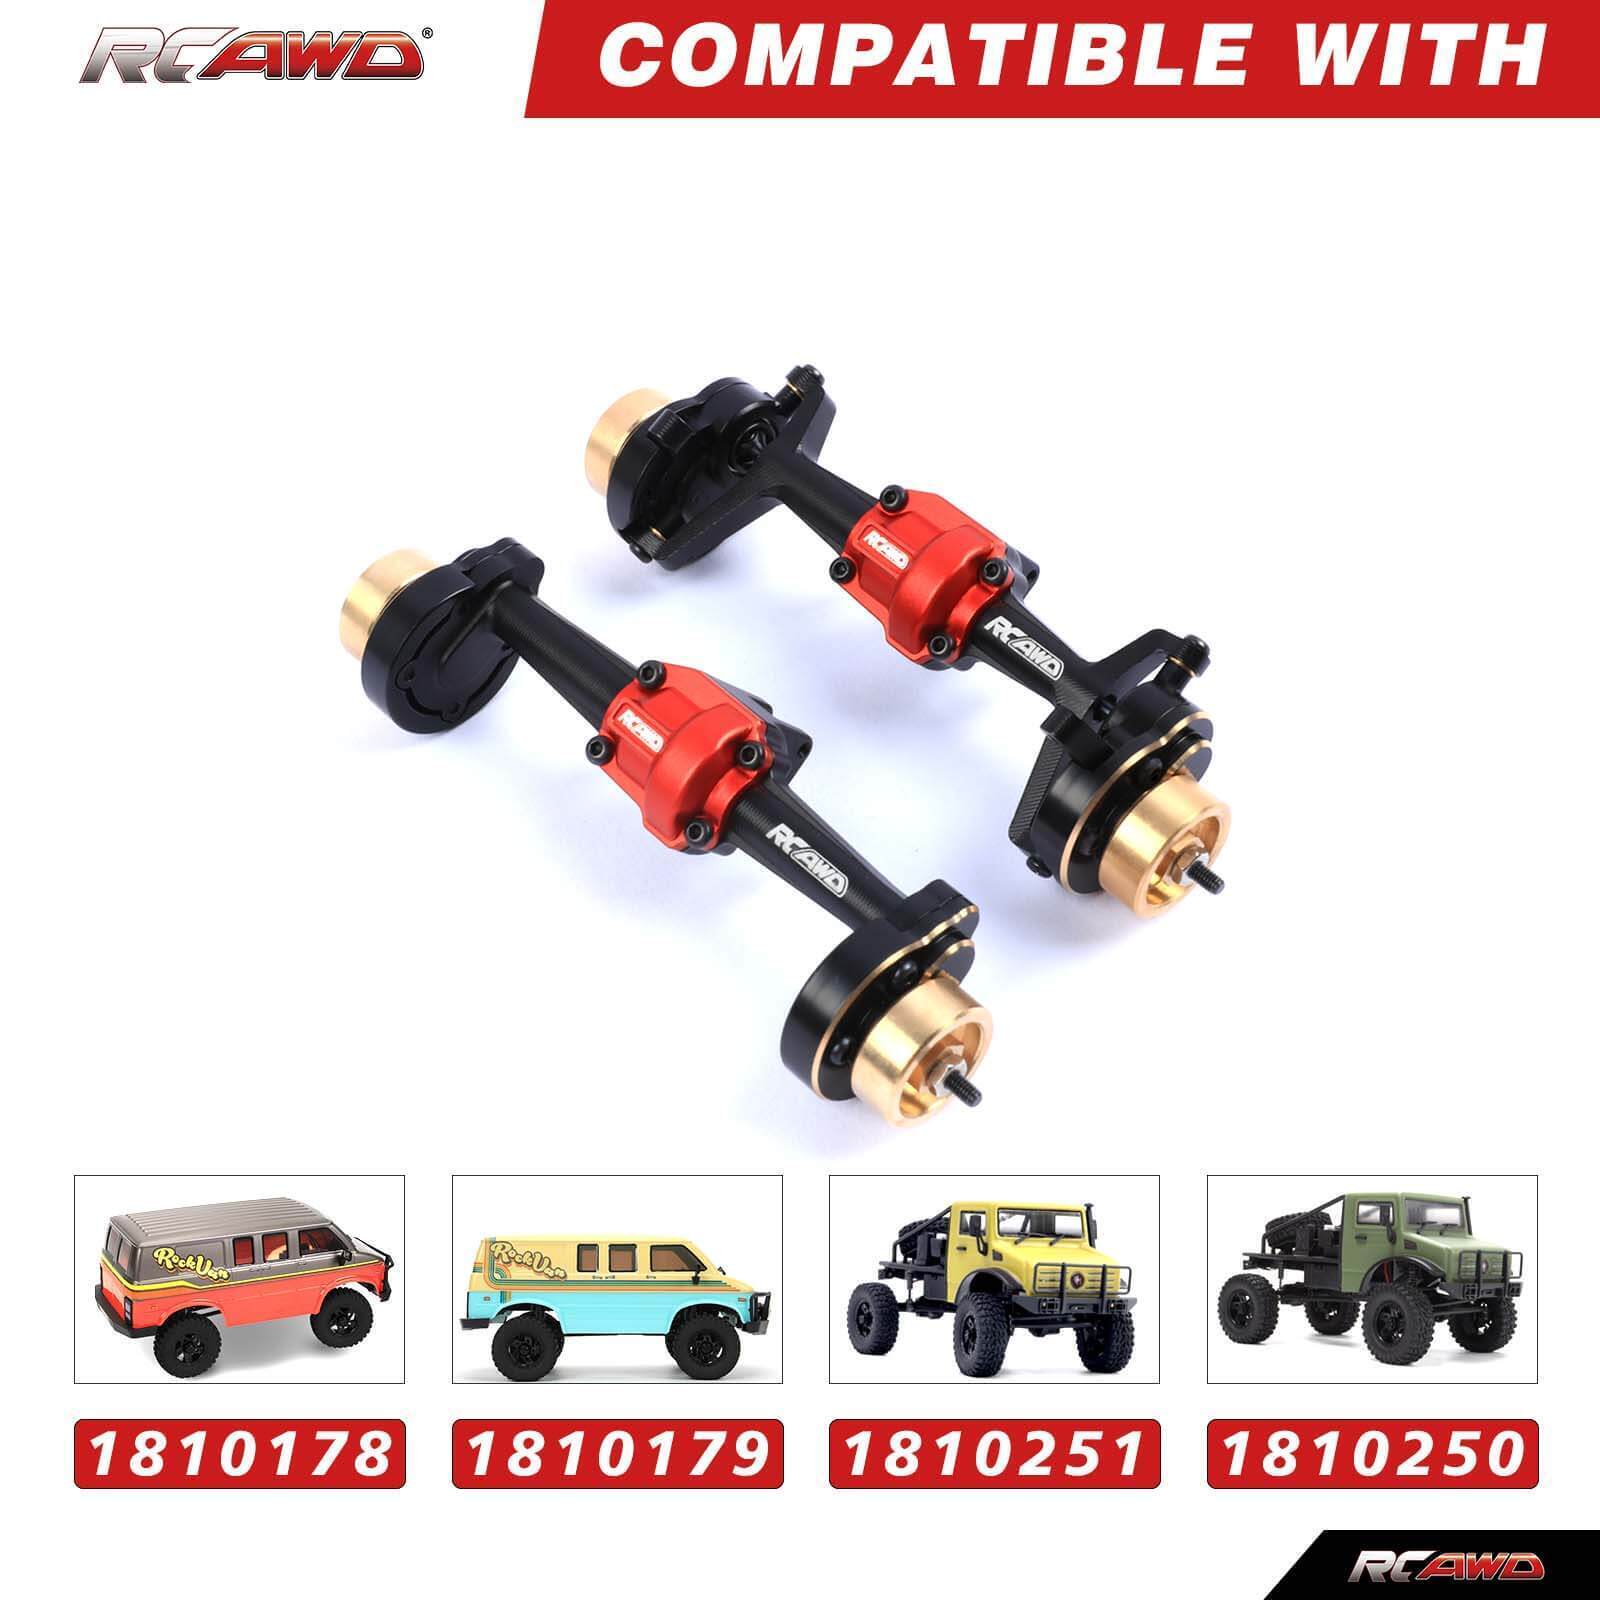 RCAWD RC CRAWLER UPGRADE PARTS Black RCAWD HOBBY PLUS 1/18 Upgrade Parts Front Rear Portal Axles D2-240231